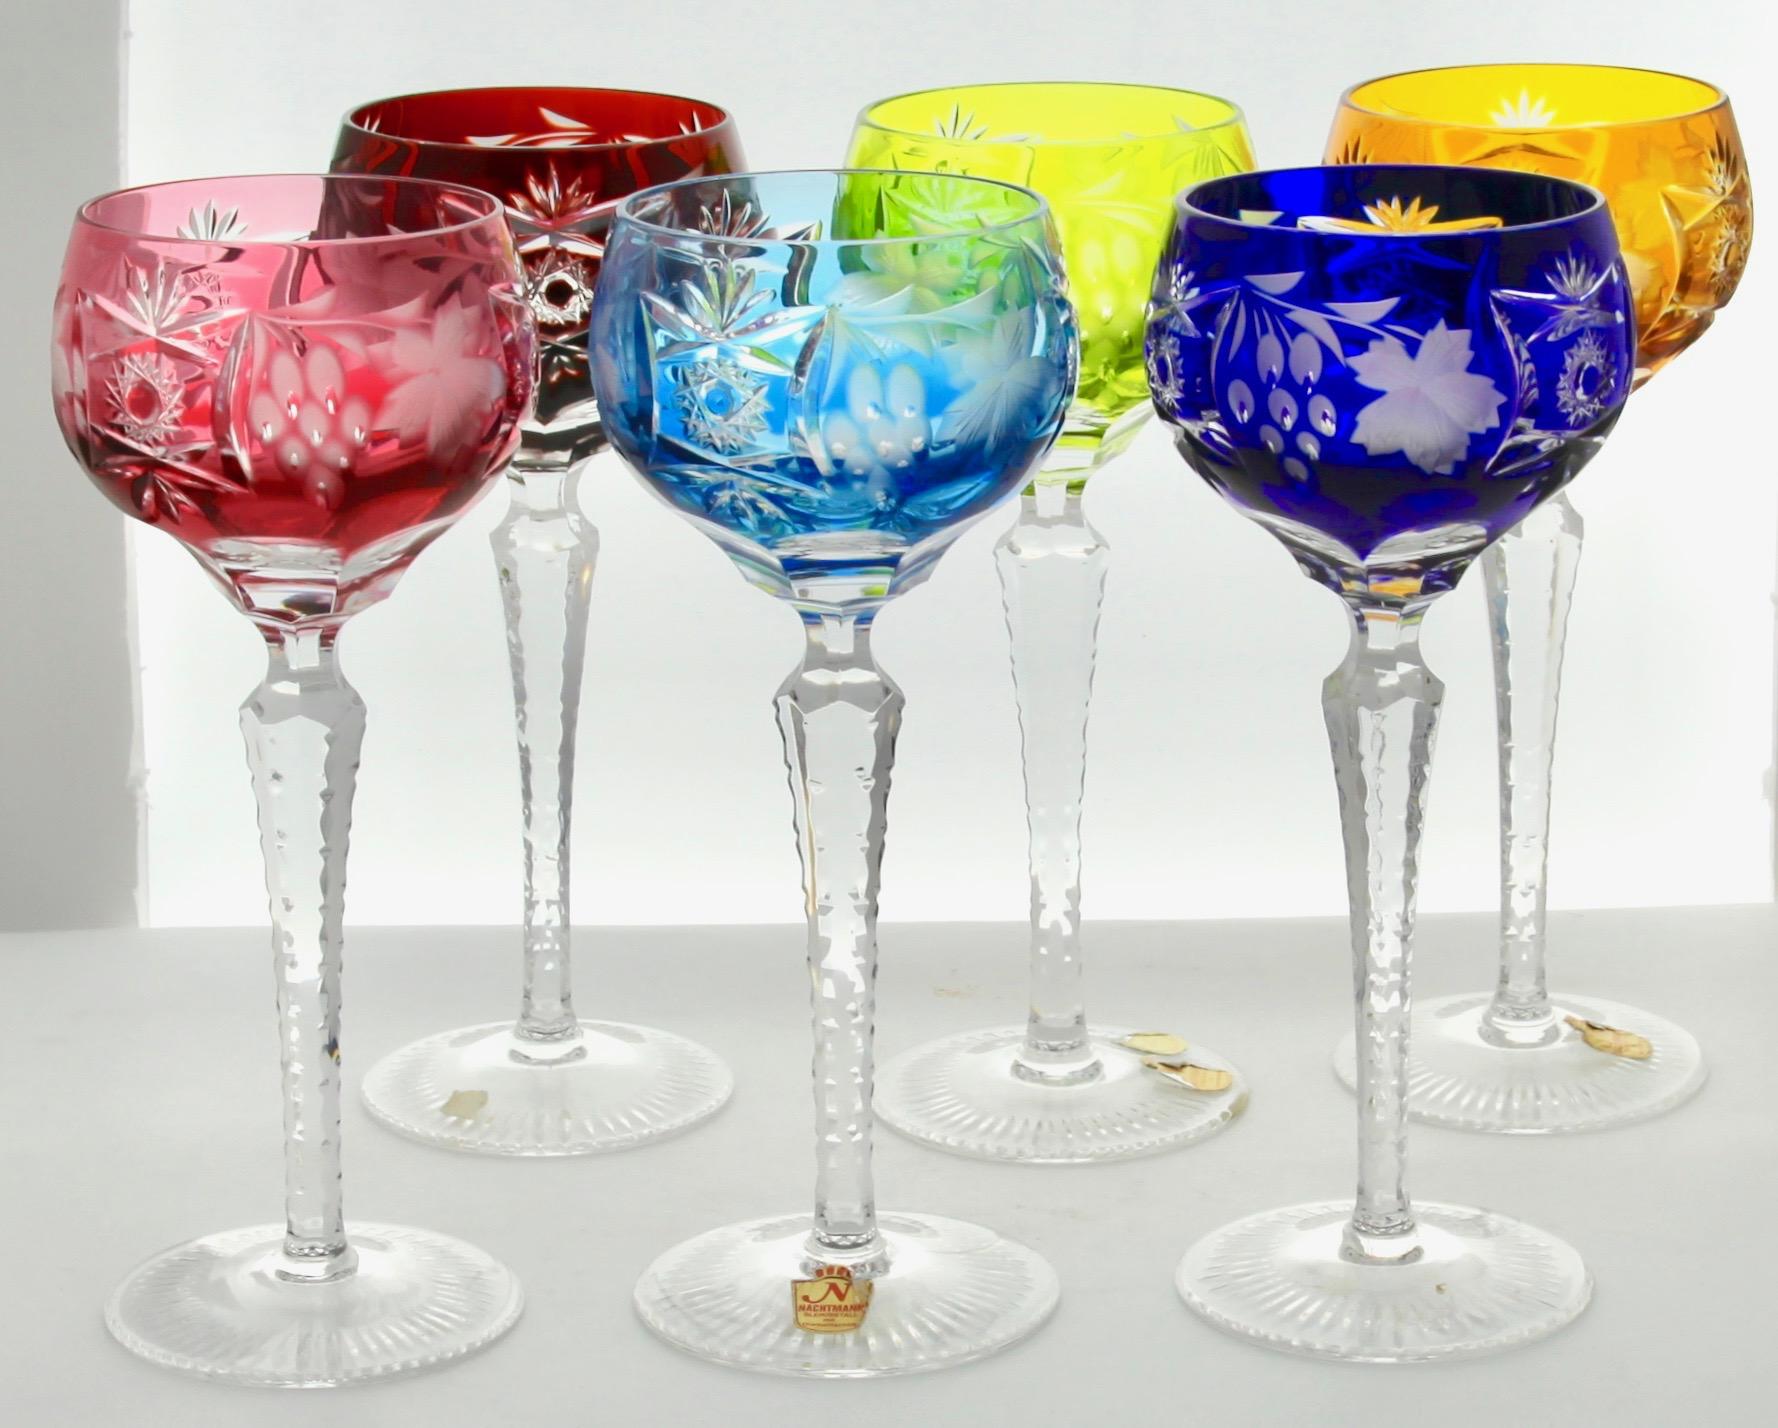 Vintage mix set of 6 cut to clear crystal stem glasses.
Mix crystal (Bleikristall 24% Mundgeblasen Handgeschliffen) glasses

Clear demi crystal glass. Side facetted and toothed stem. The bowl with colored overlay cut to clear.
In best condition.

We